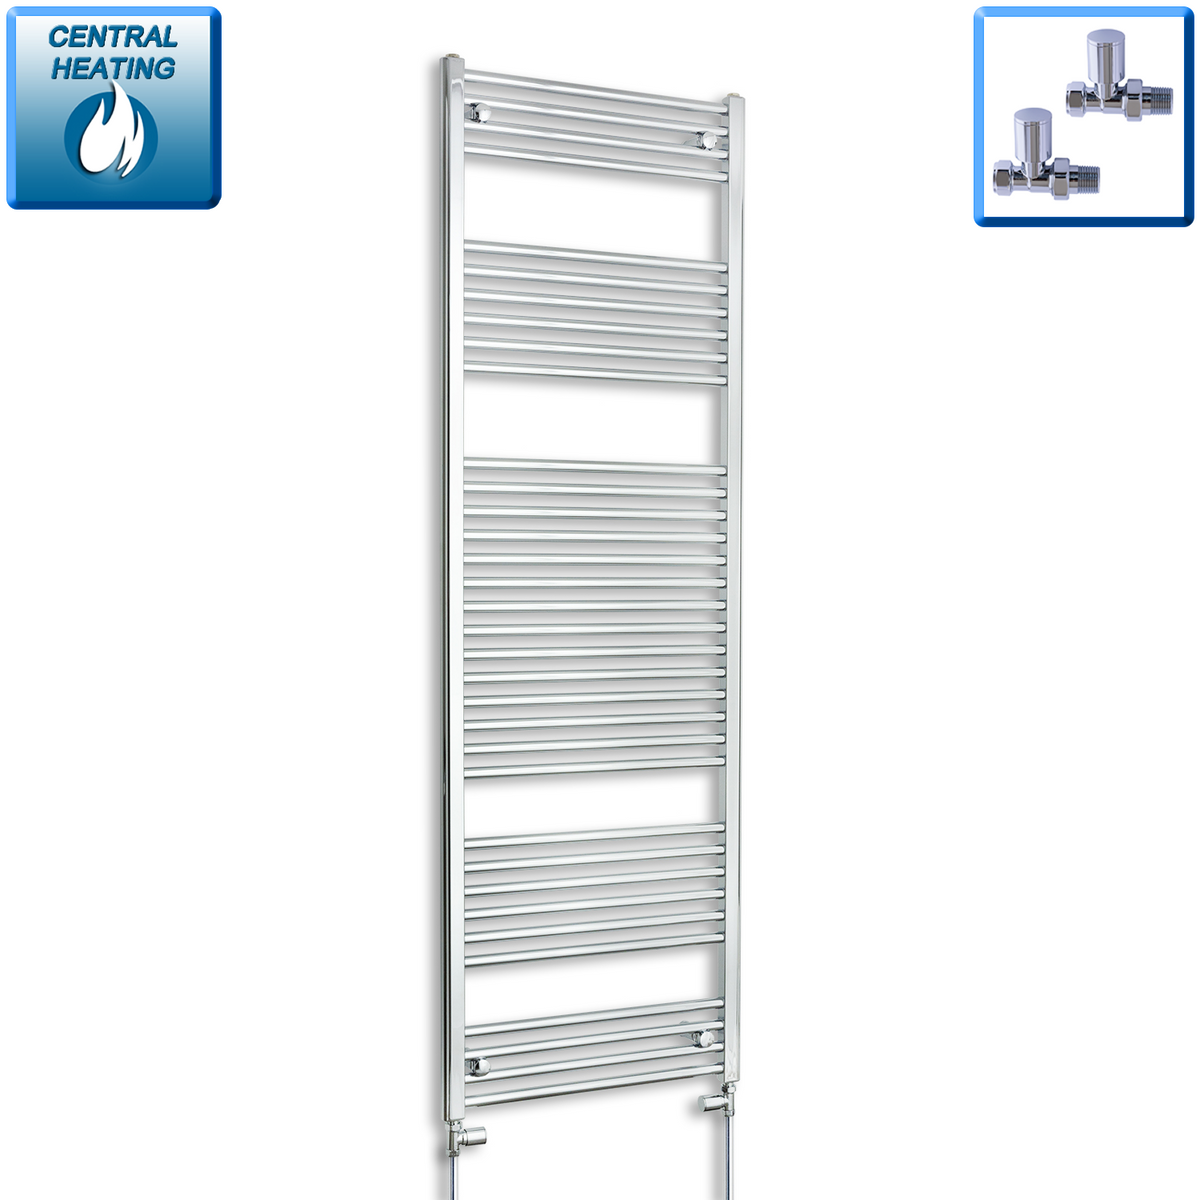 1856 mm High x 400 mm Wide Heated Straight Towel Radiator Chrome central heating